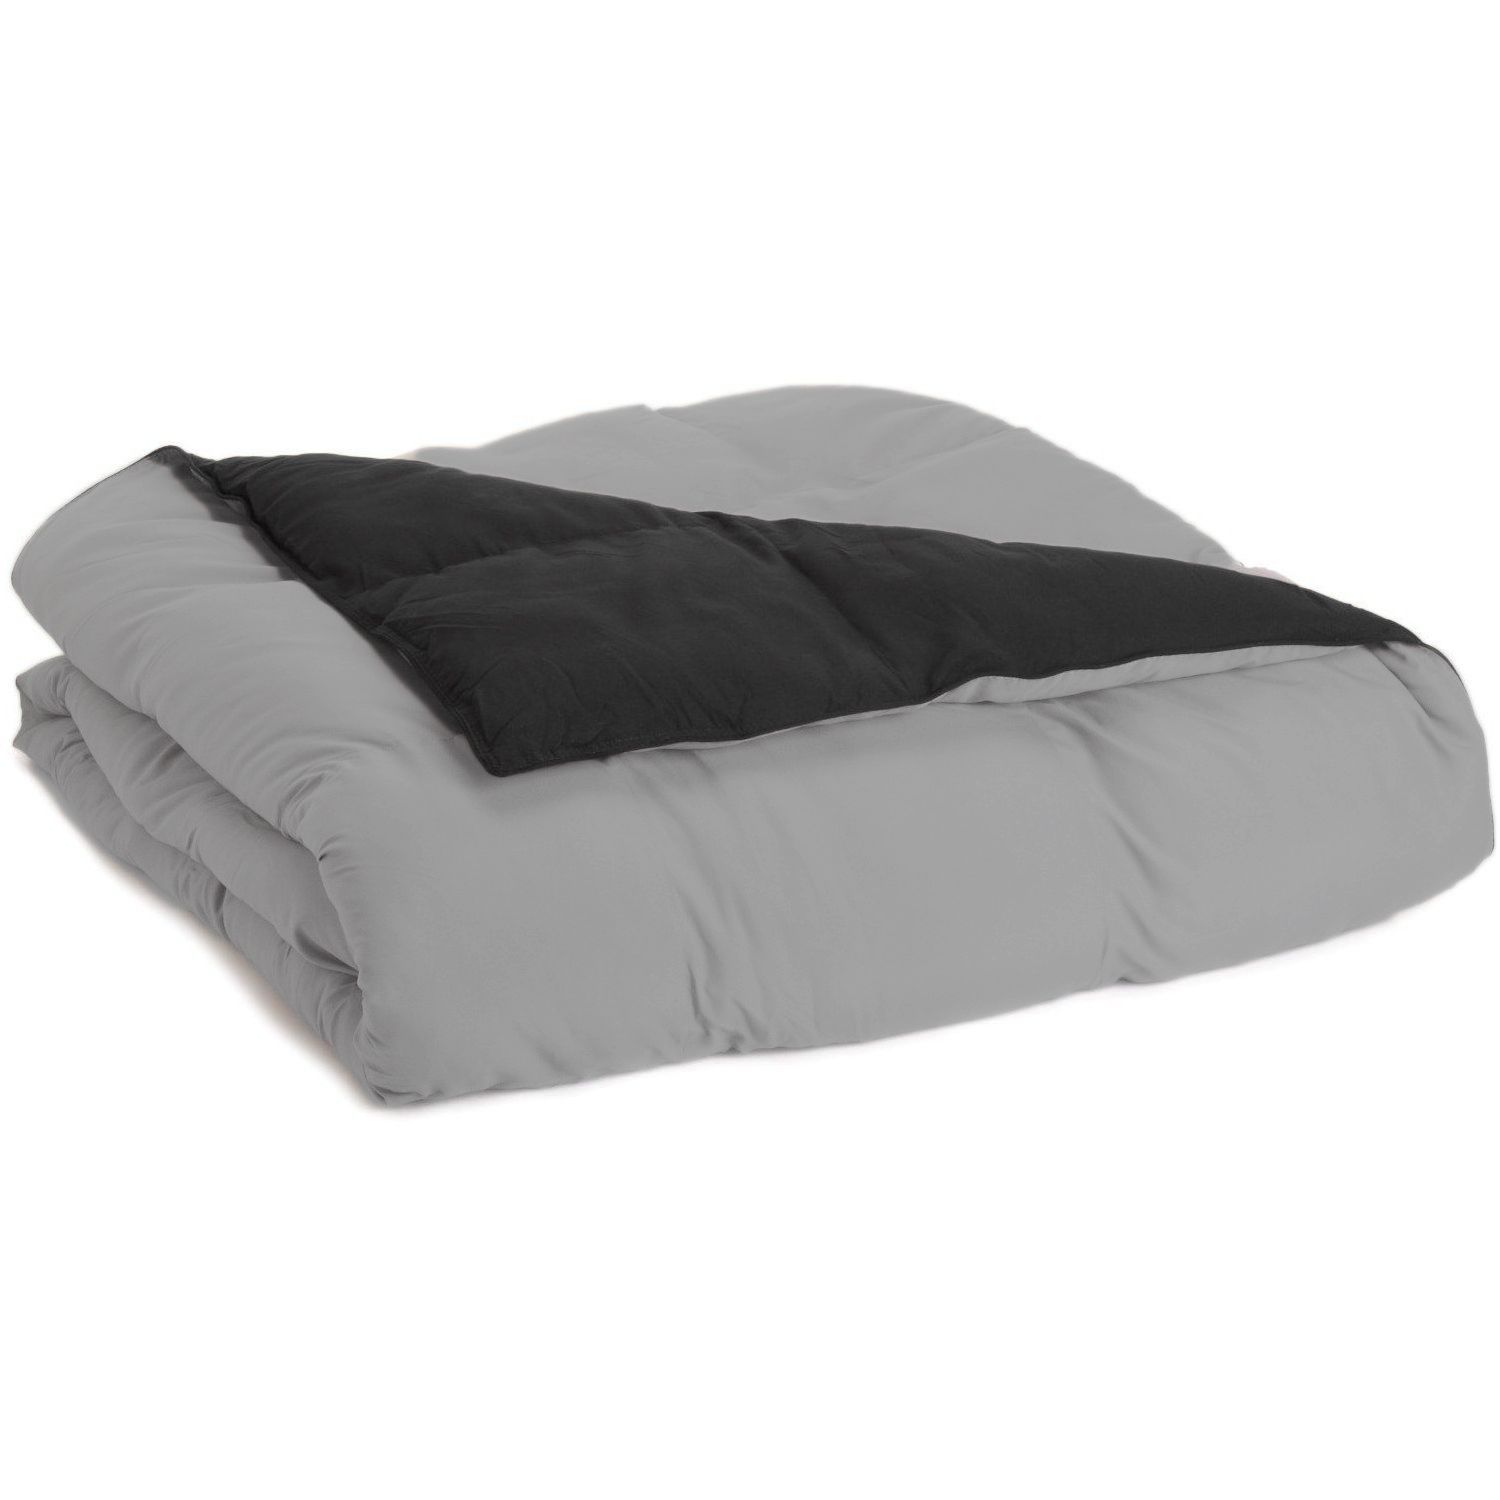 Superior Down Alternative Reversible Comforter, Twin/ Twin XL, Burgundy - image 1 of 4